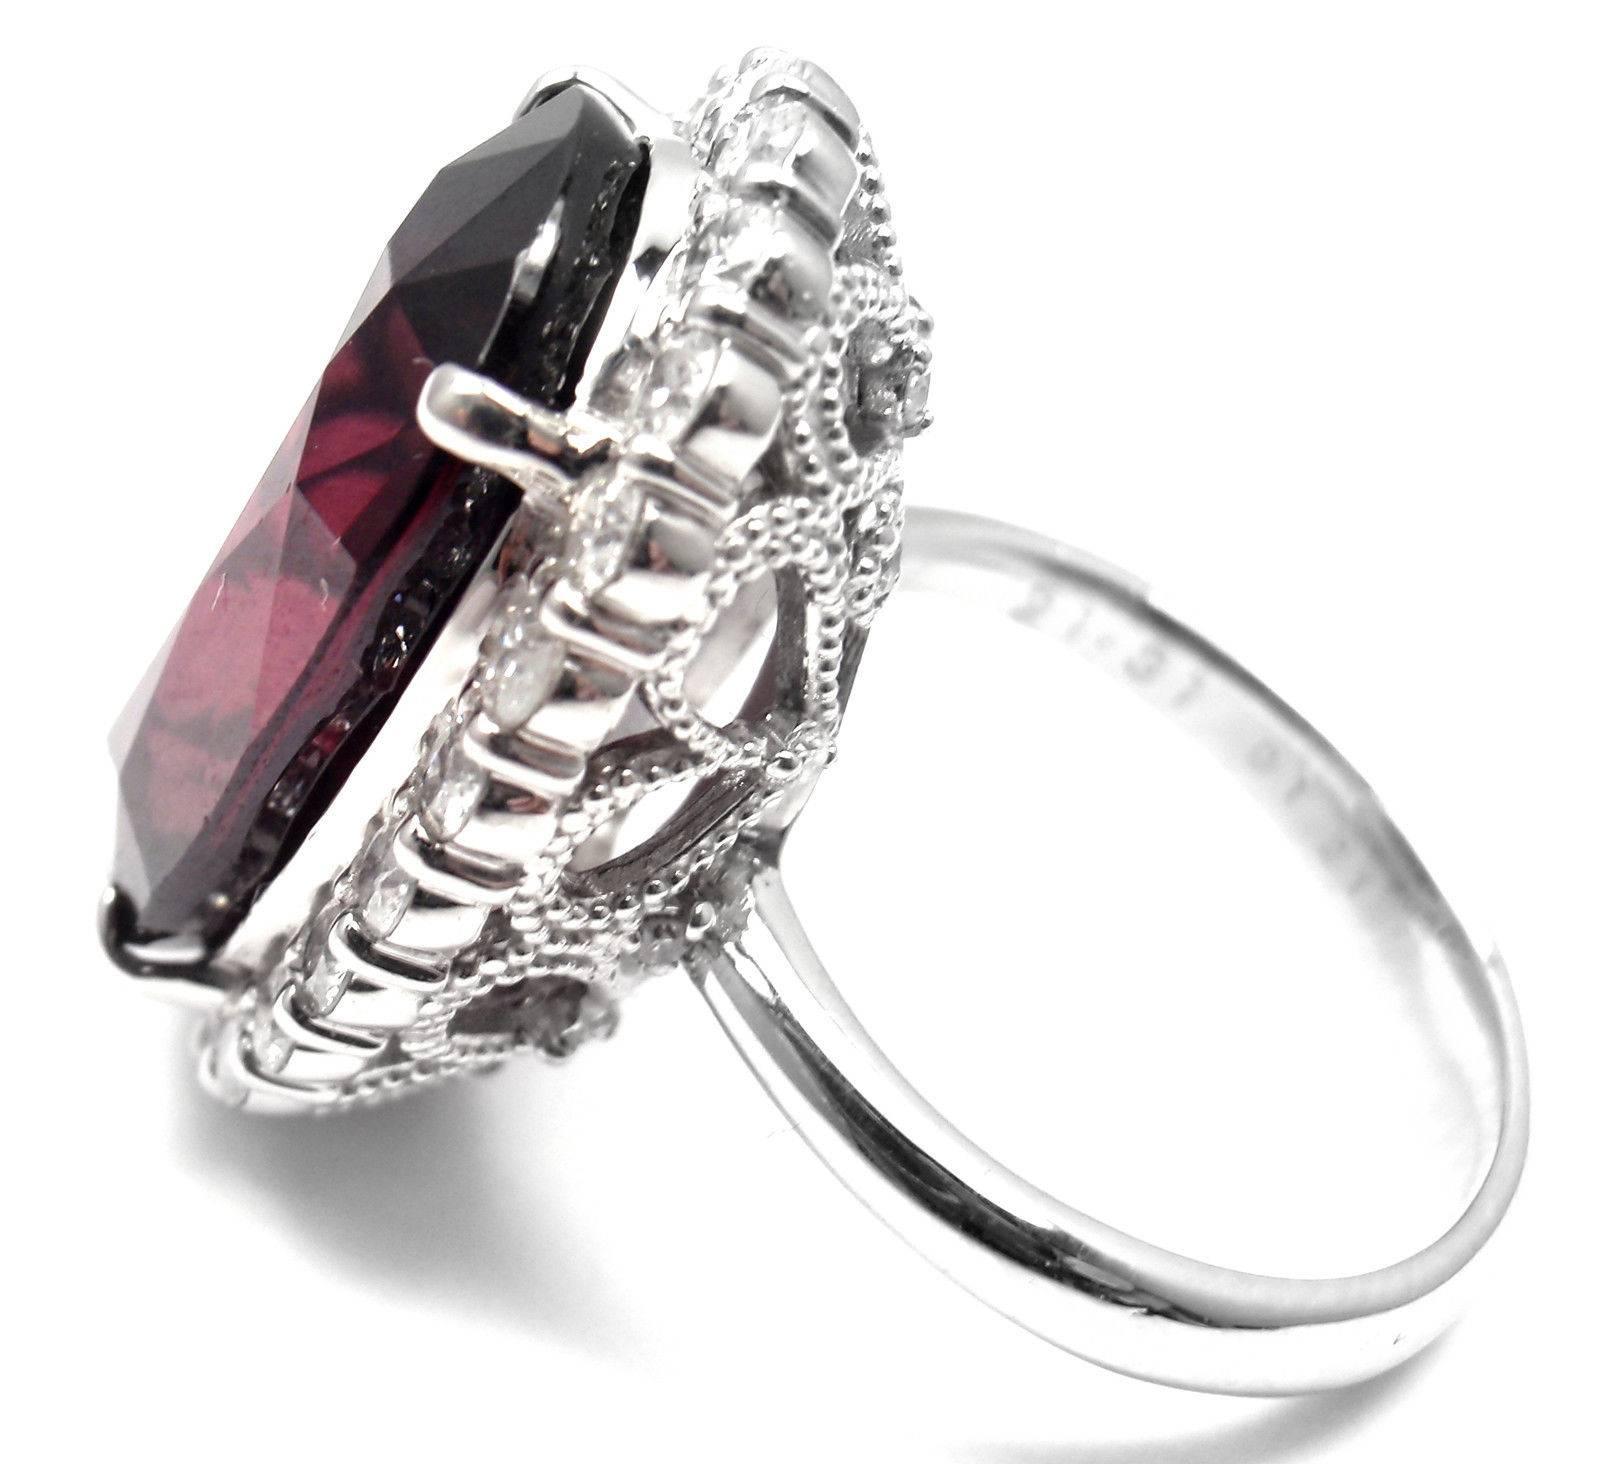 Gorgeous! Platinum Large  21.31ct Garnet And 1.21ct Diamond Cocktail Ring.  
With1 1 Oval Shape Natural Garnet
Garnet Measurements 10 x 9 x 10mm
Color Dark Red
25 round brilliant cut diamonds VS2 clarity, G color total weight approx. 1.21ct total